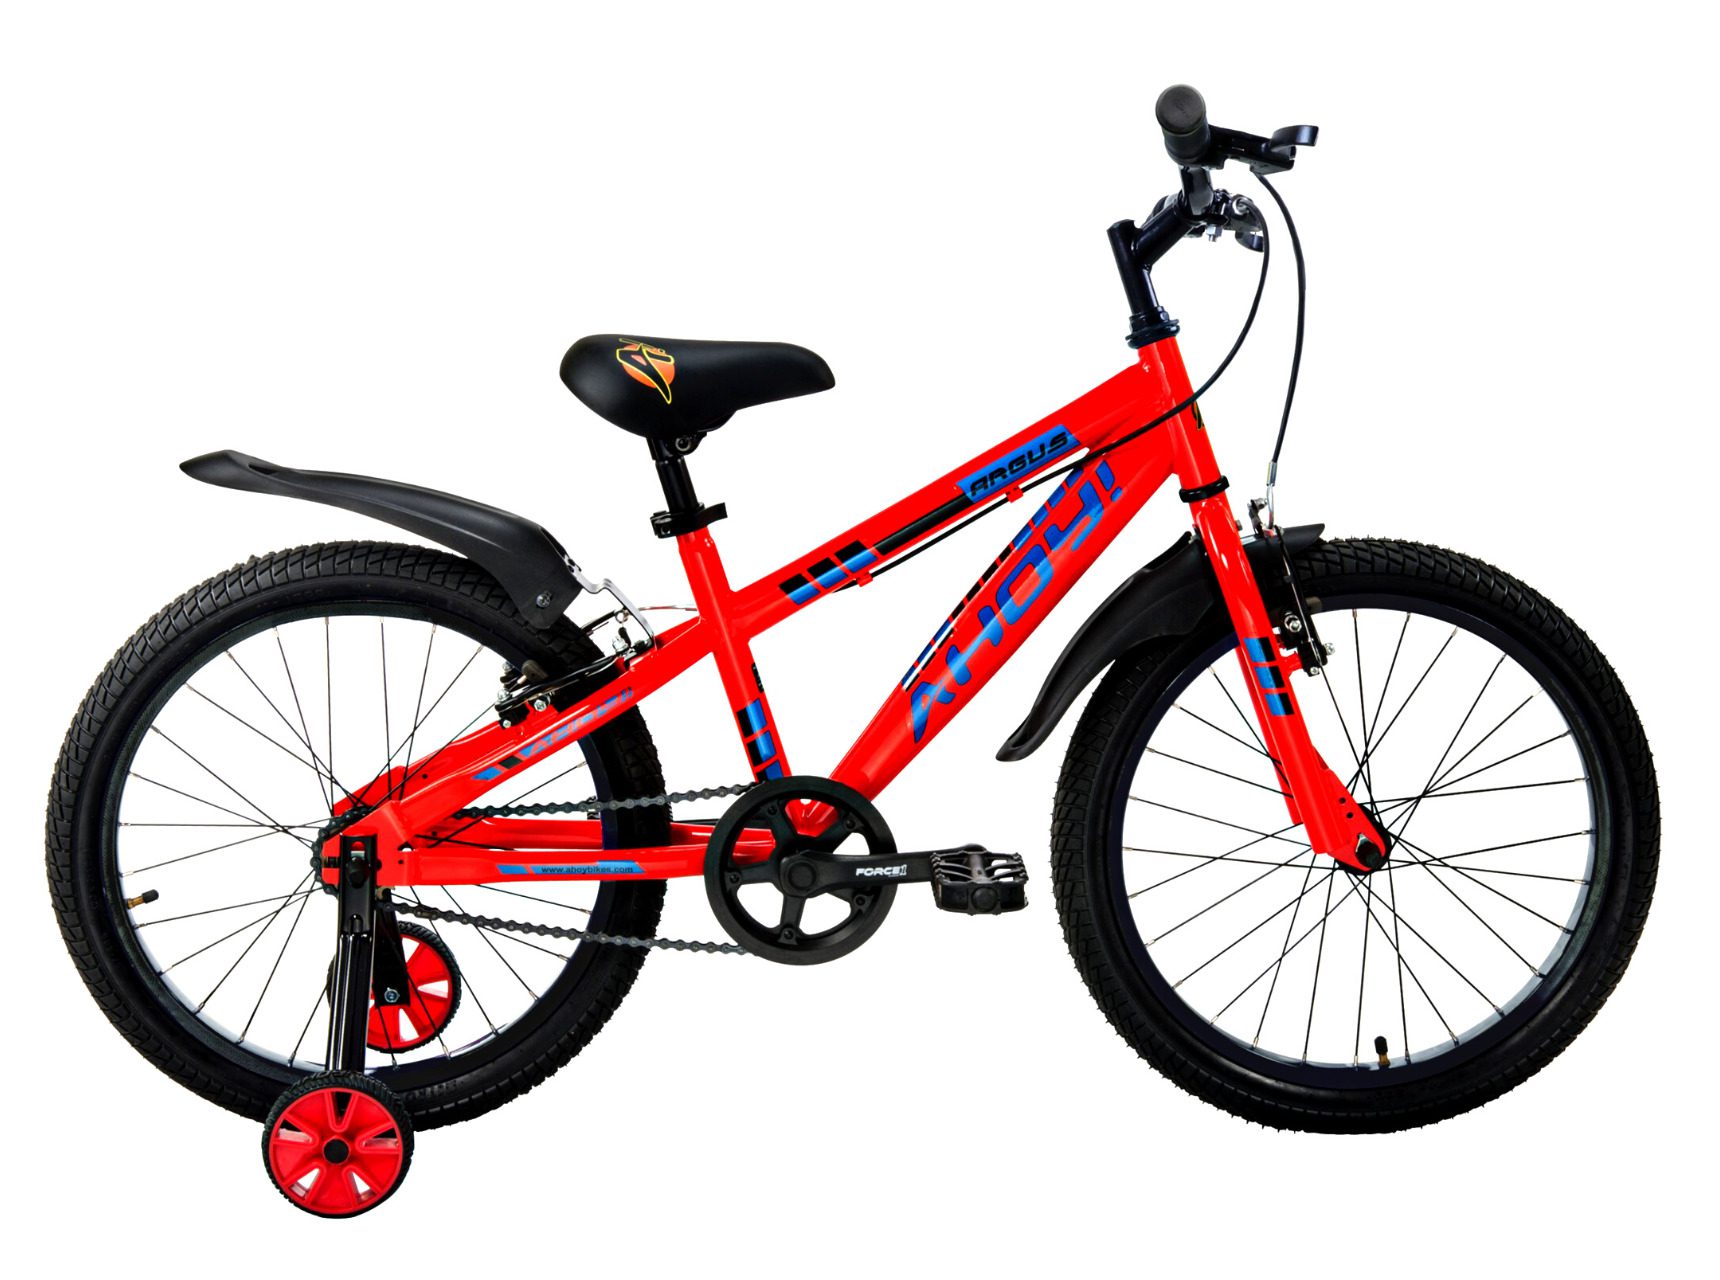 Argus Kids Bike Single Speed 20T | Buy Red Cycle Non Gear for Kids